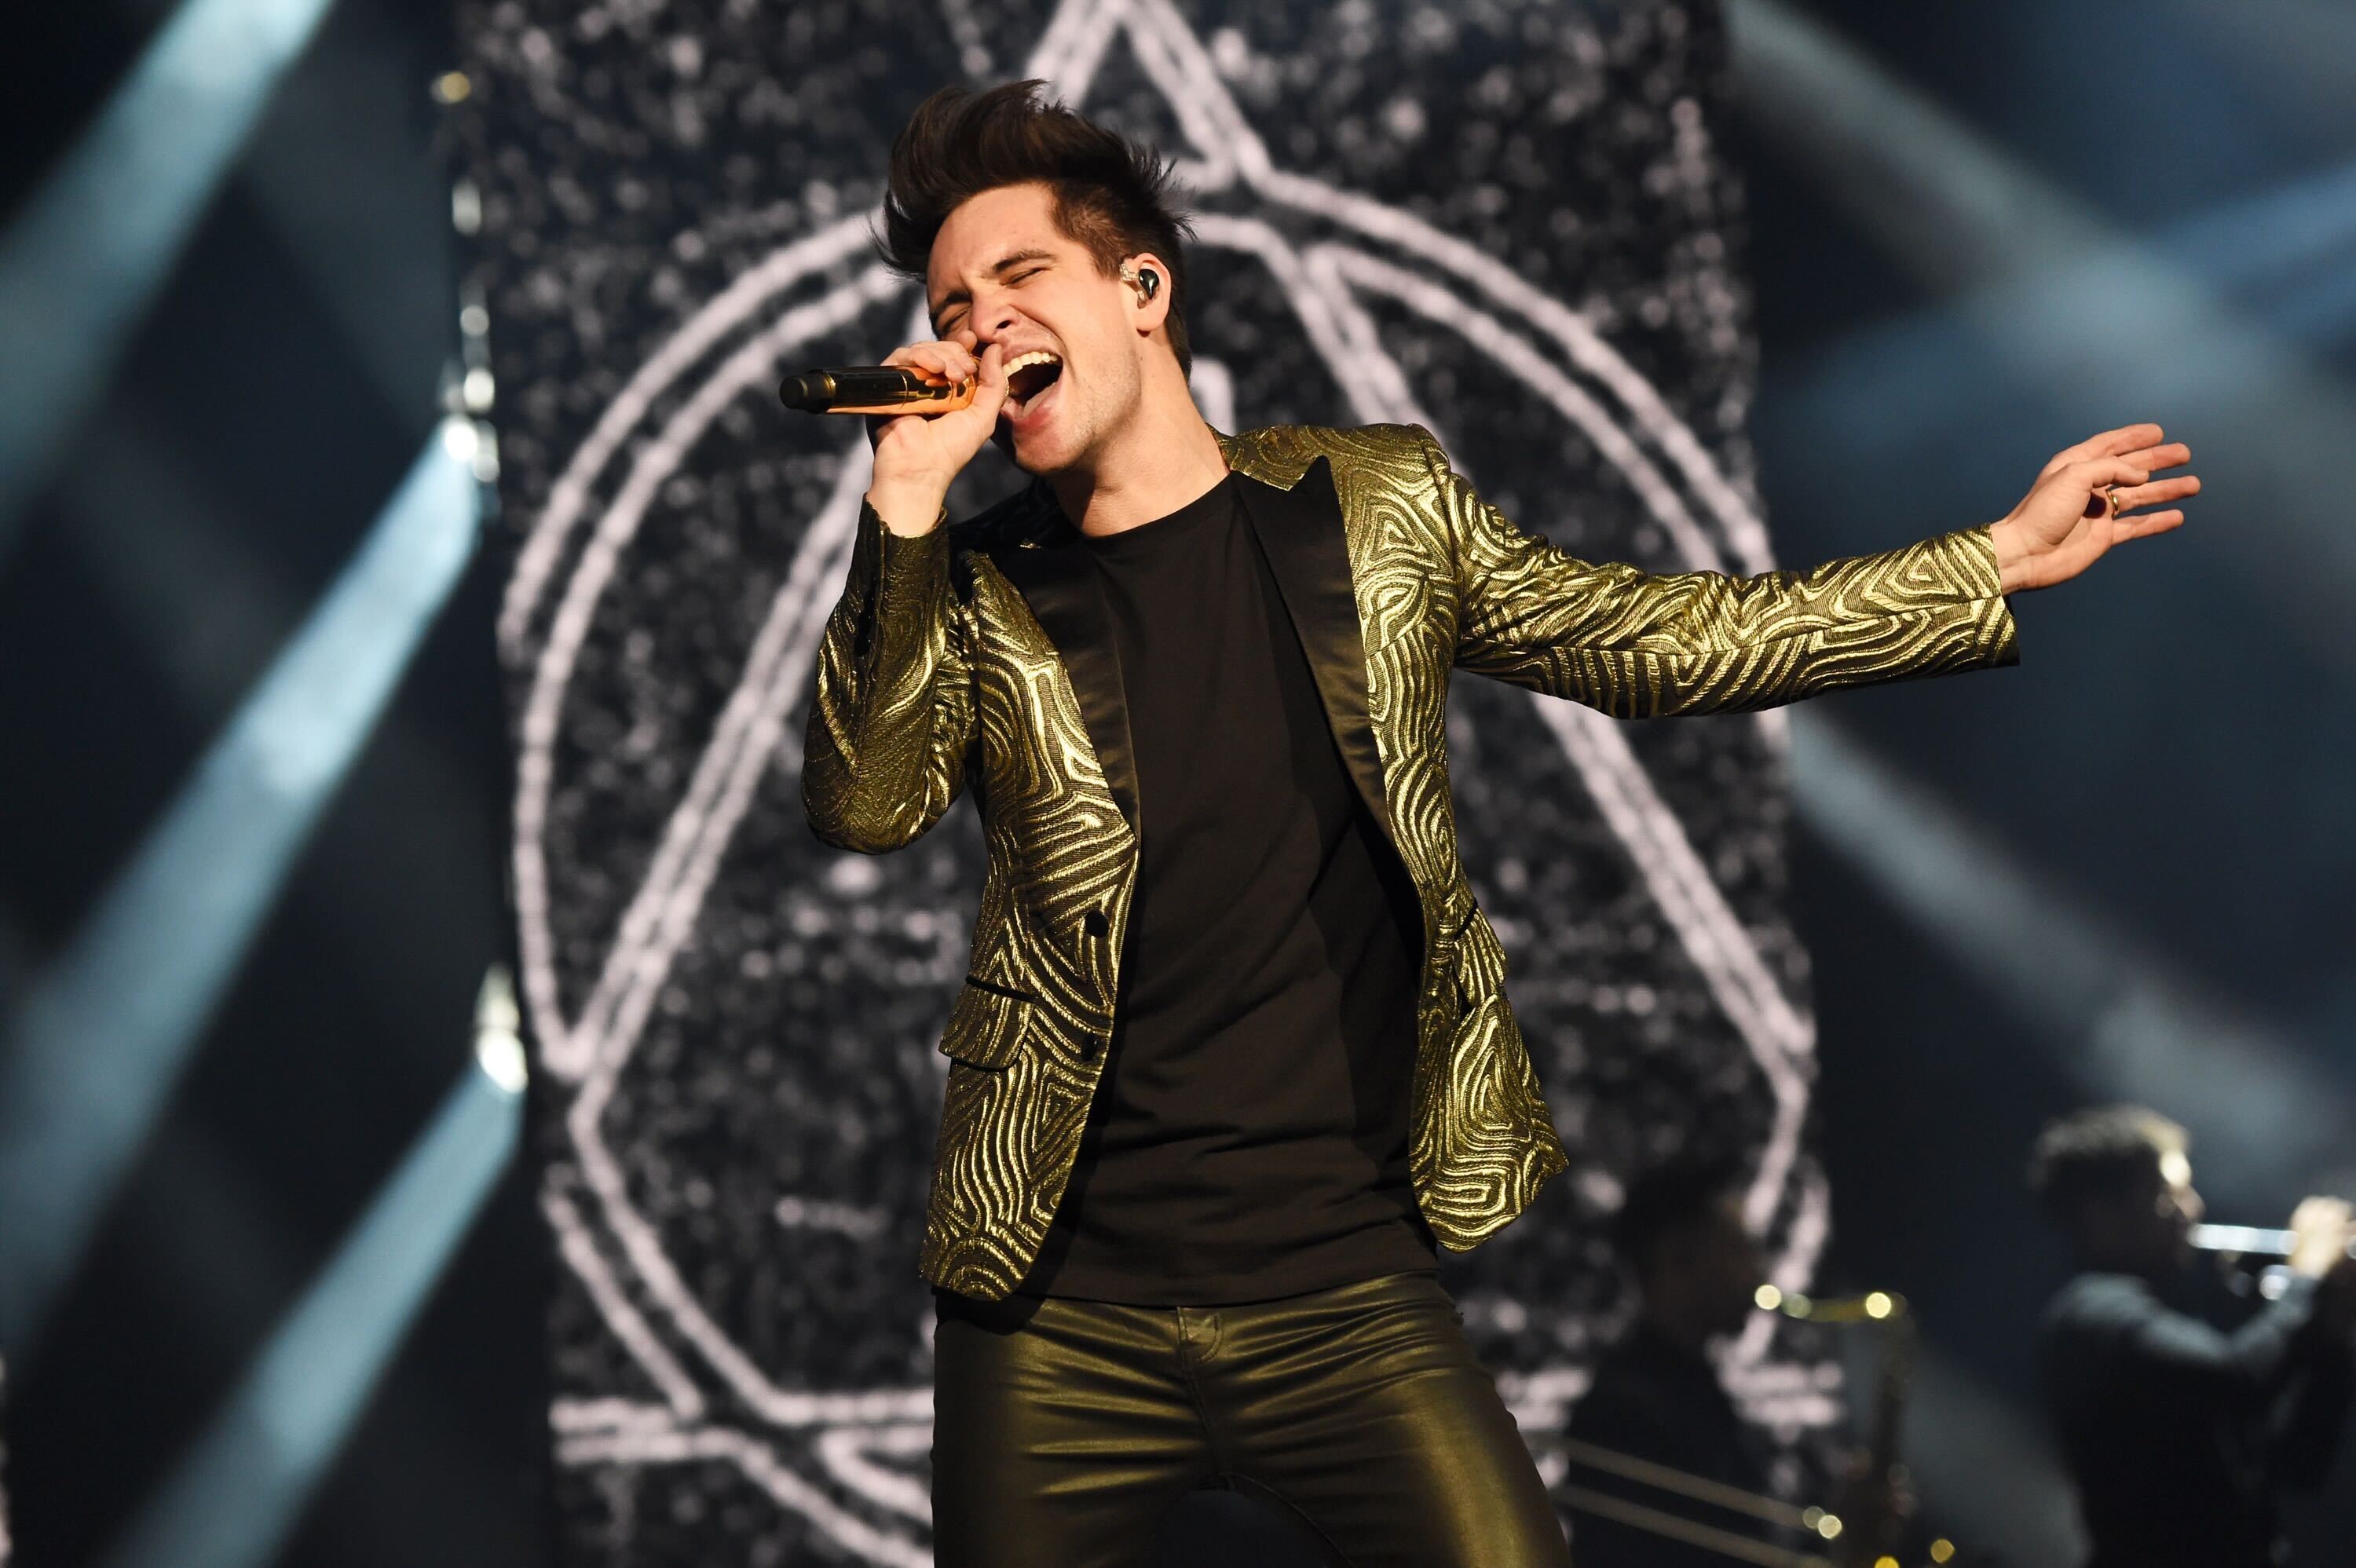 New Music Vol. 93 feat. Panic! At The Disco, Willow, blackbear & more!